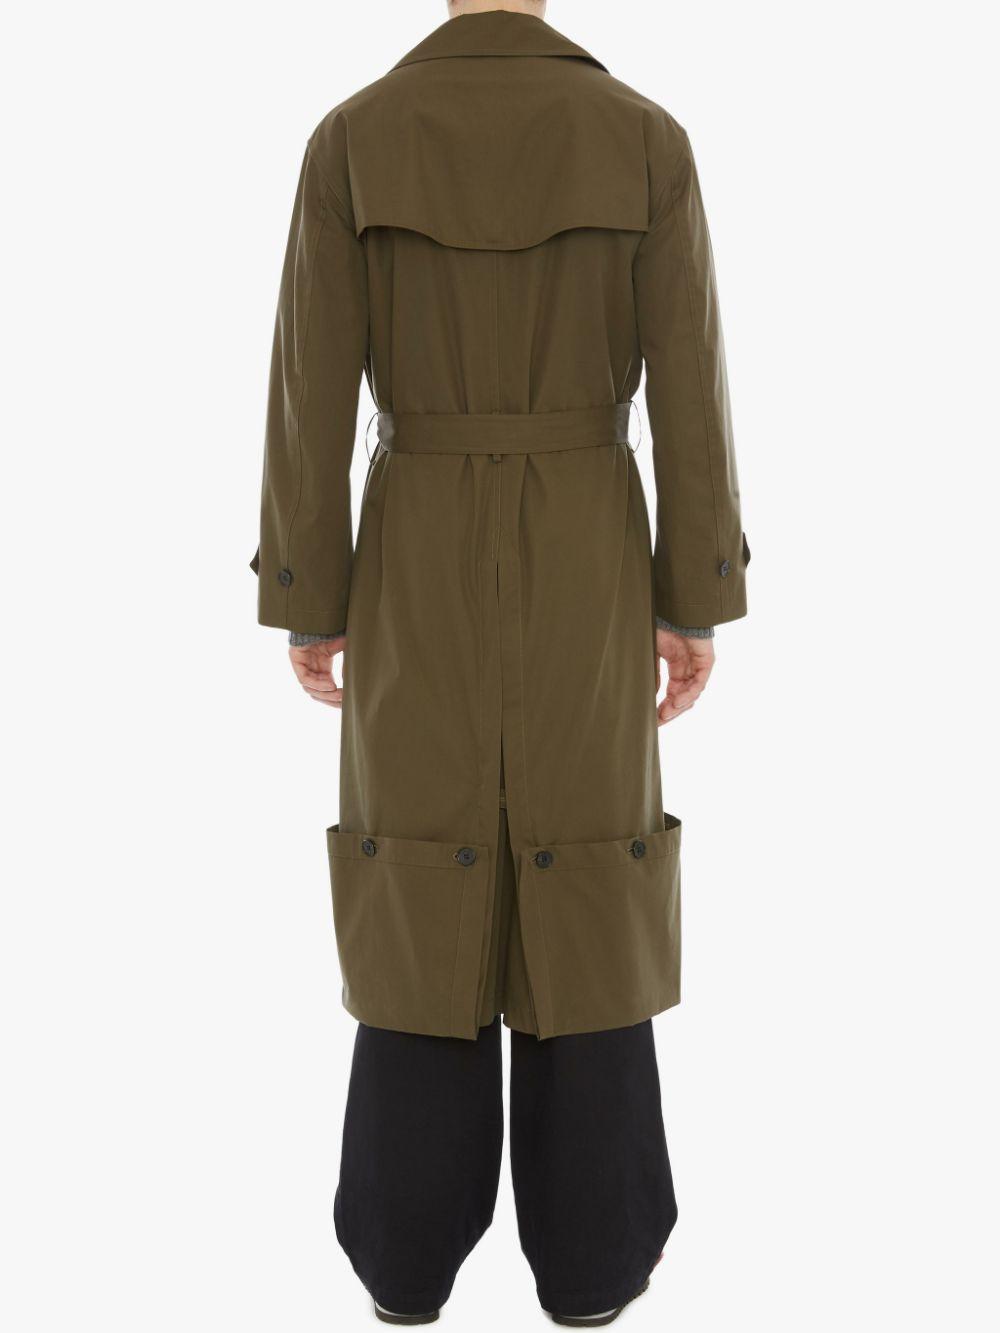 JW Anderson Fold Up Hem Trench Coat in Green for Men - Lyst